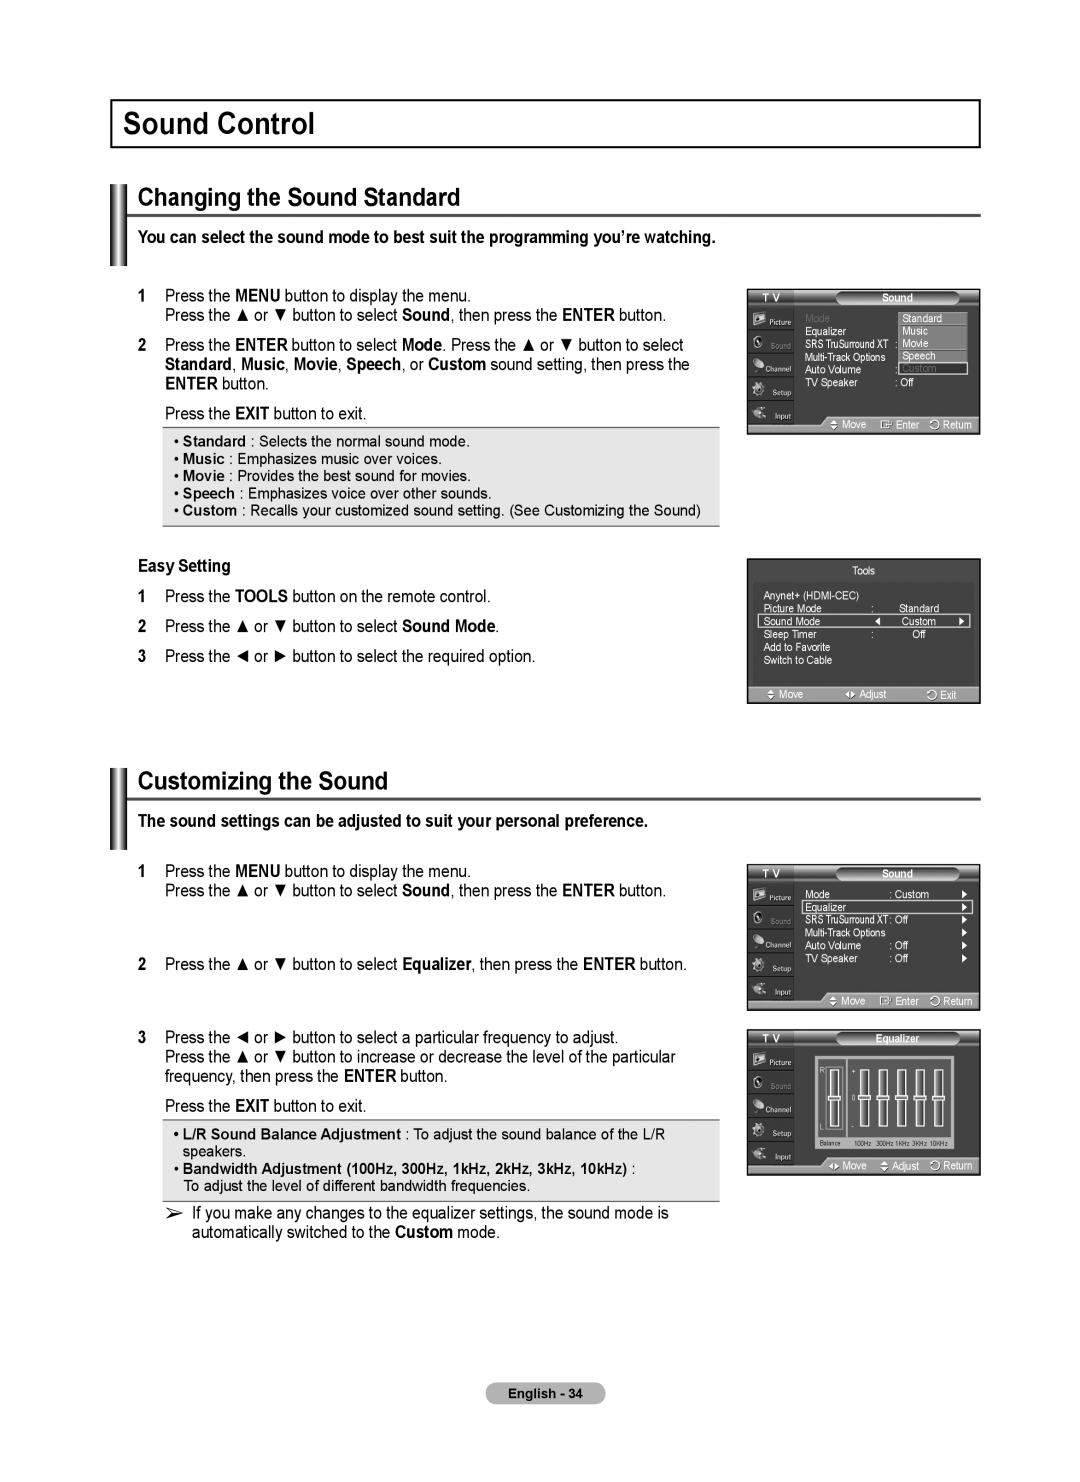 Samsung 460 user manual Sound Control, Changing the Sound Standard, Customizing the Sound, Easy Setting 